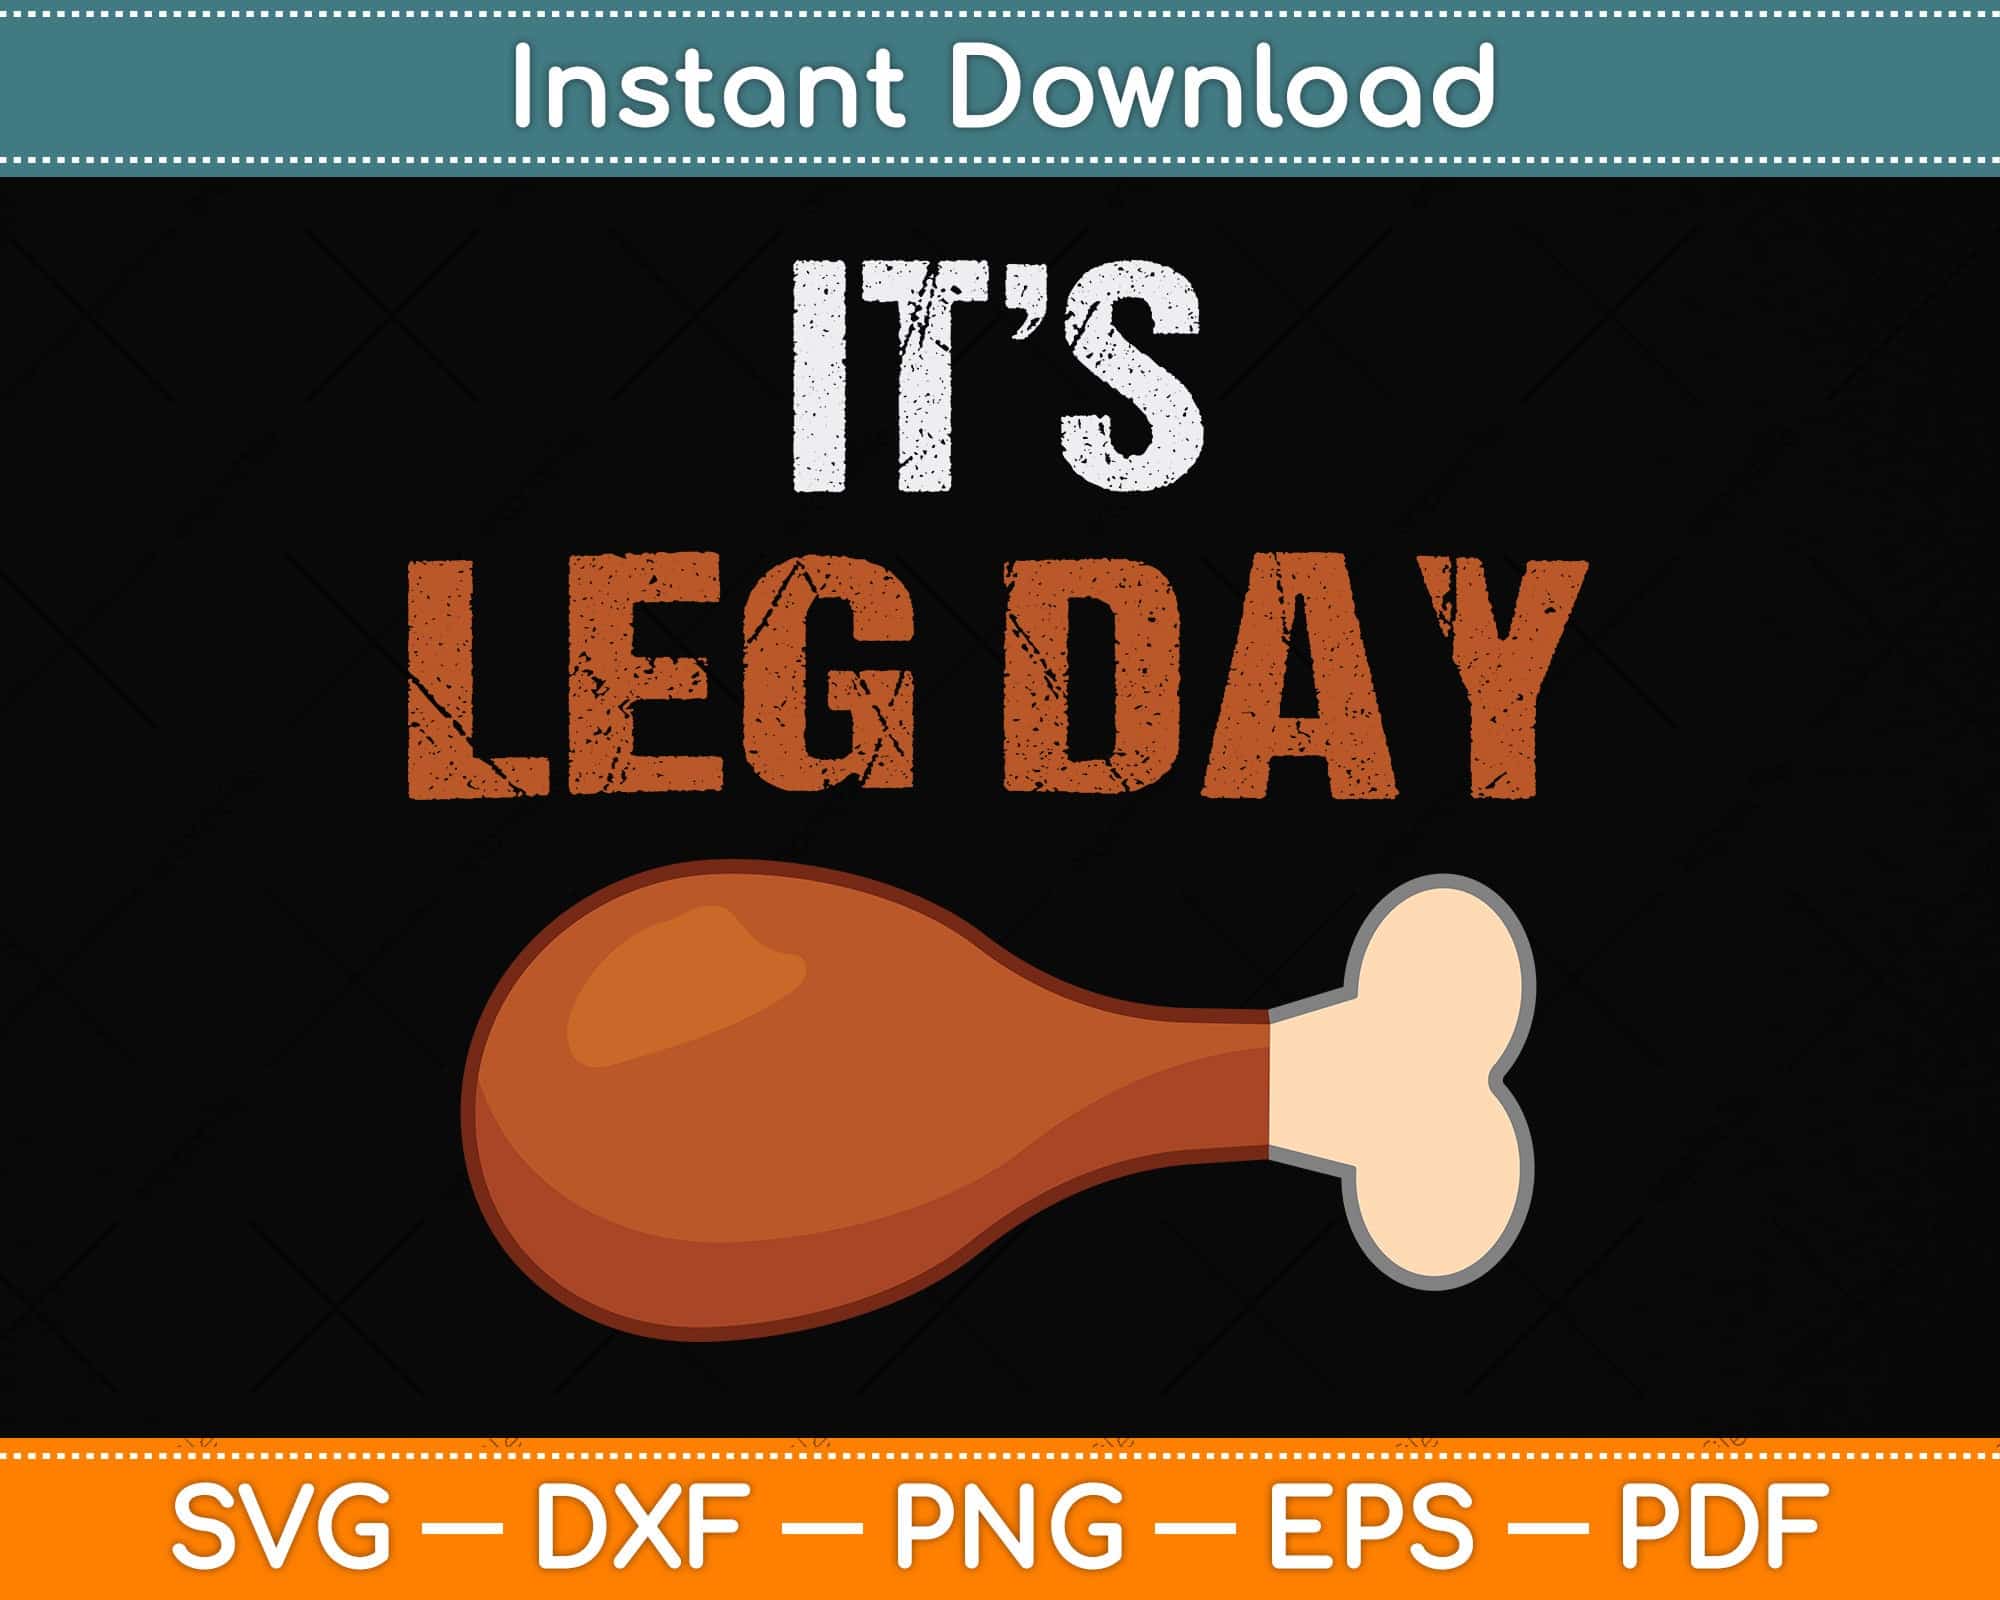 Free Day Before Thanksgiving Meme - Download in JPG